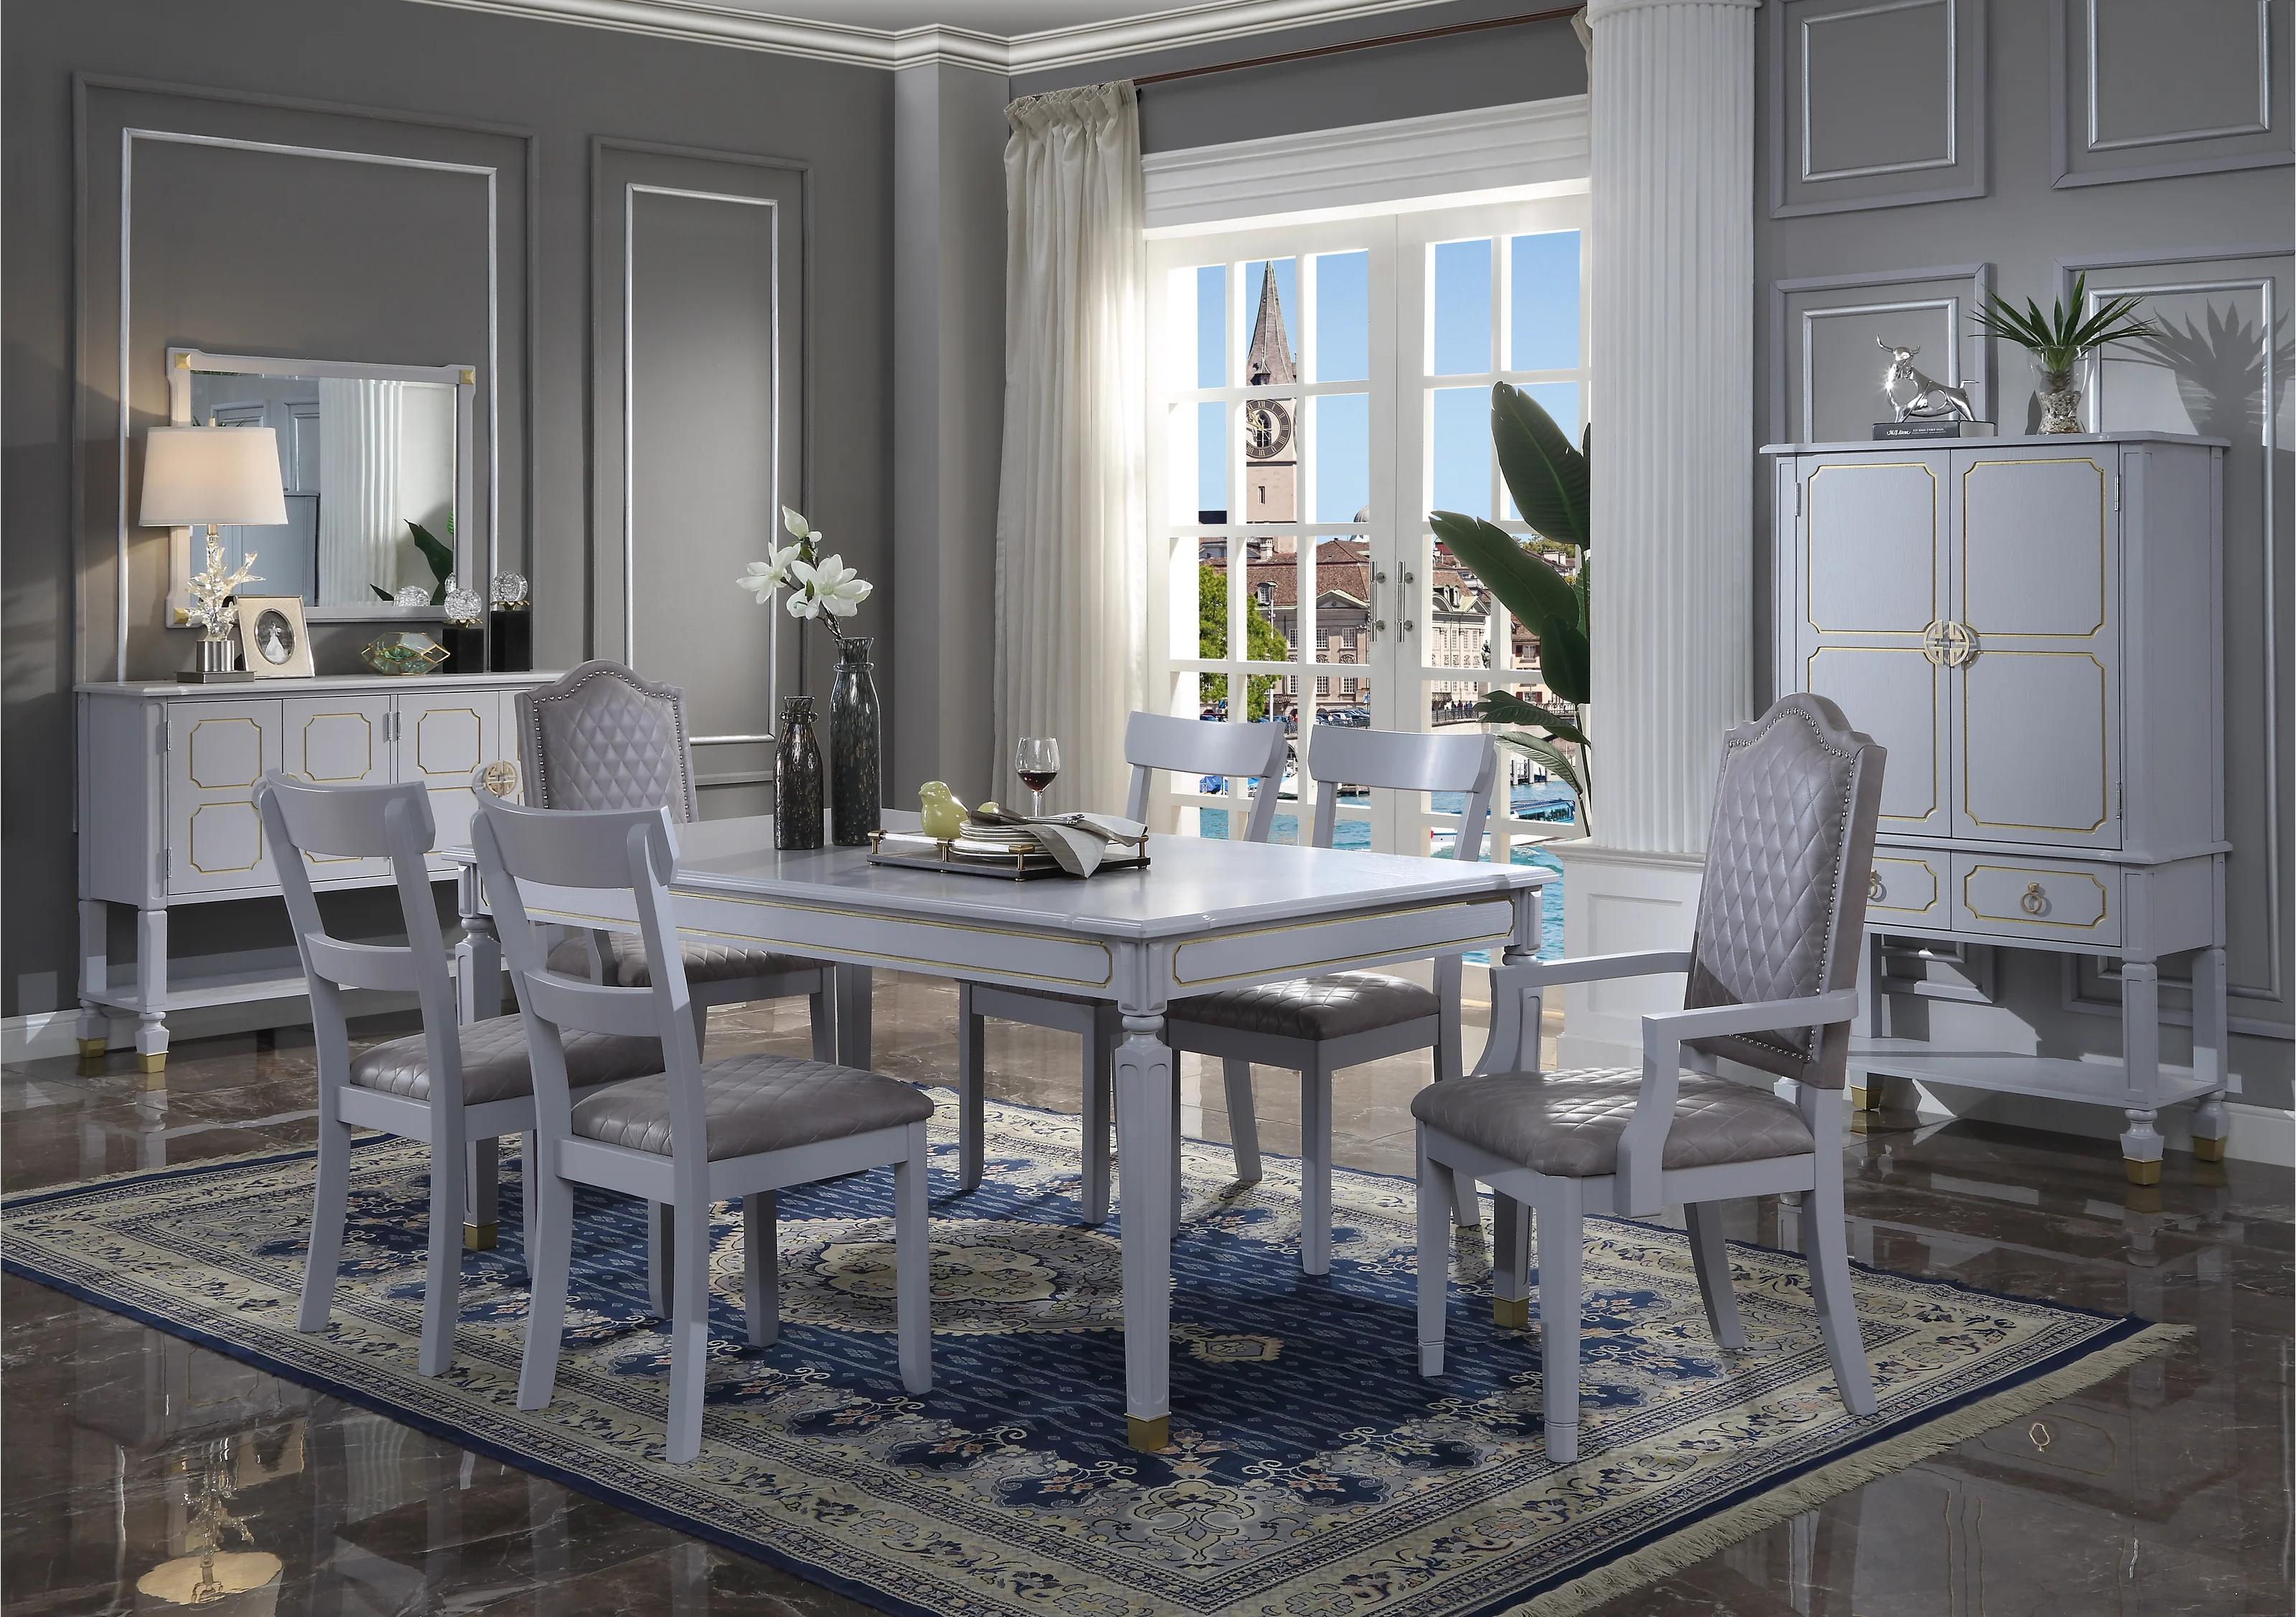 Classic Dining Room Set House Marchese 68860-7pcs in Gray Fabric